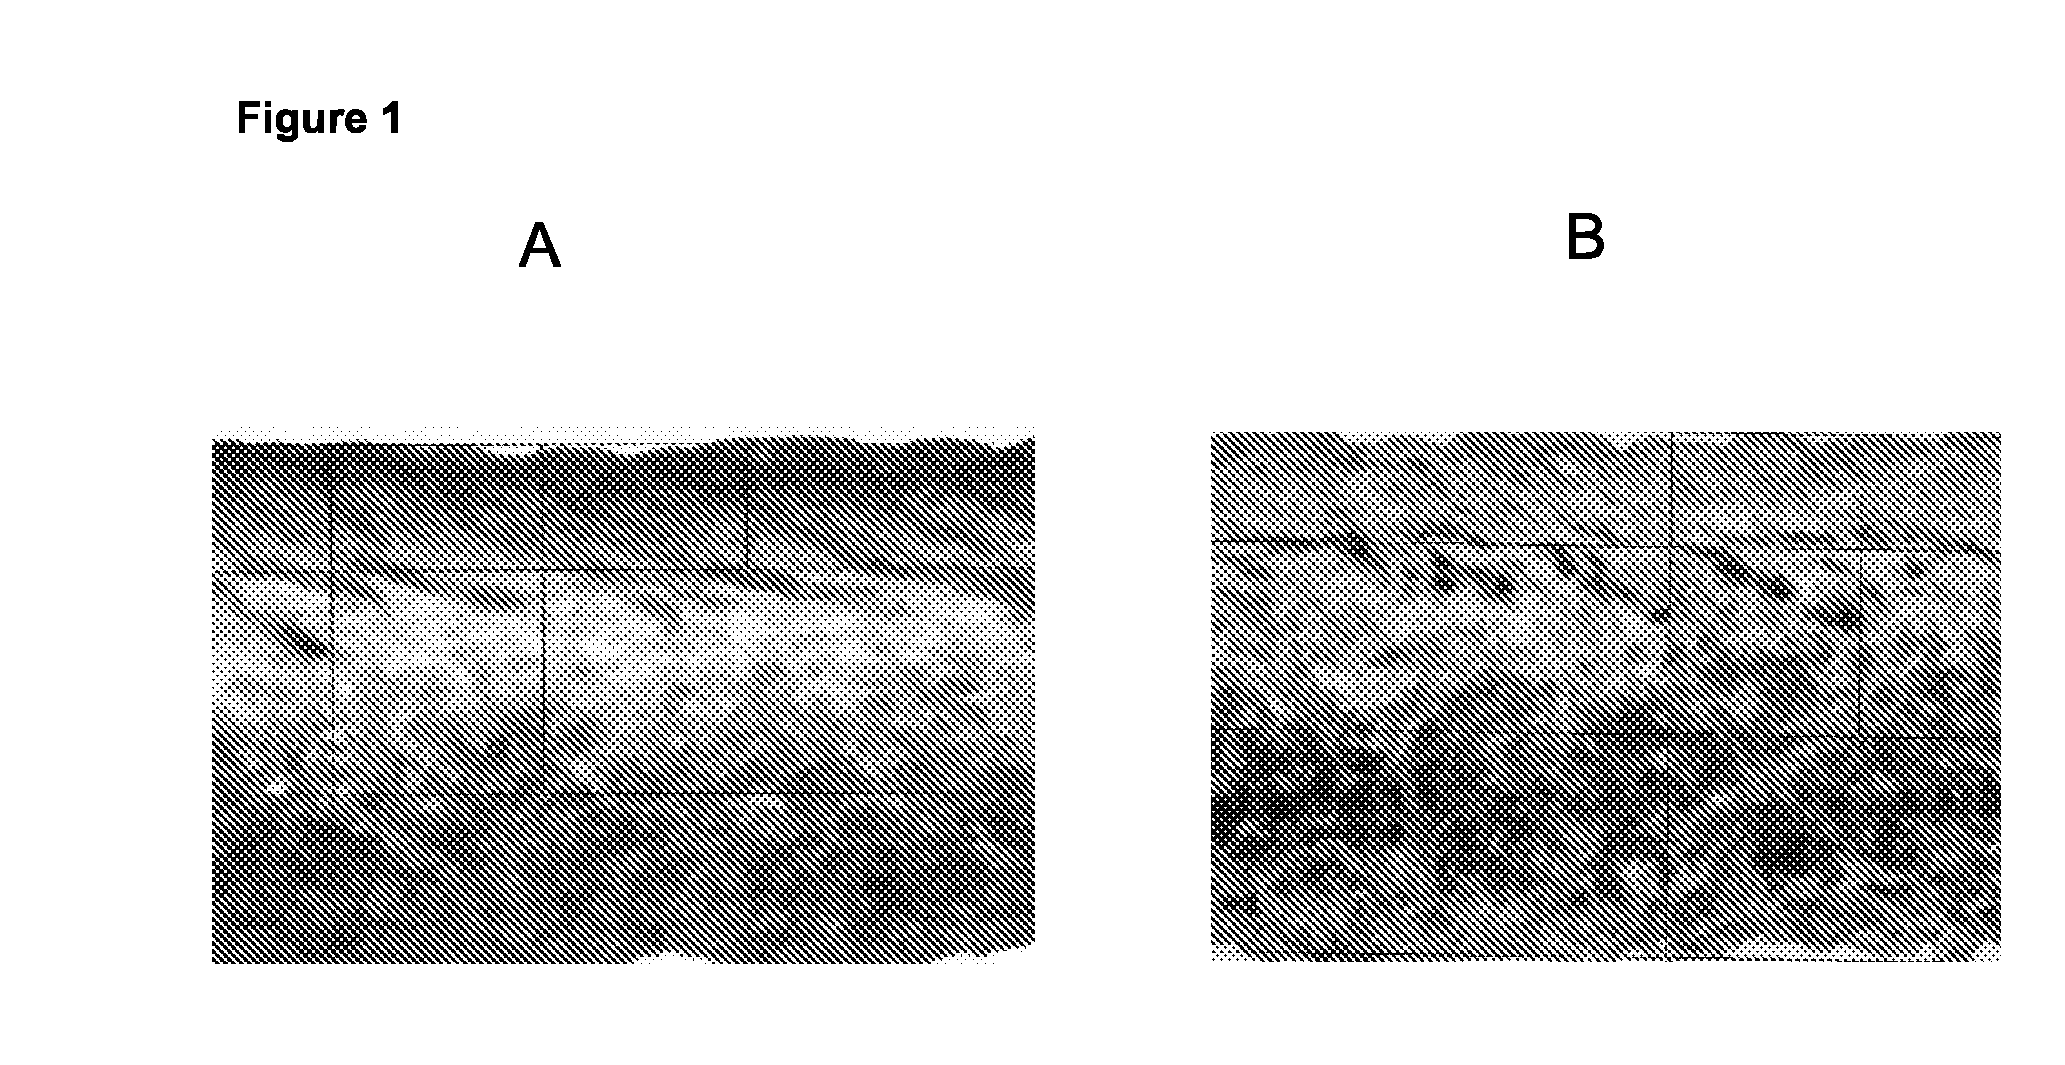 Method for treating a substrate made of animal fibers with solid particles and a chemical formulation